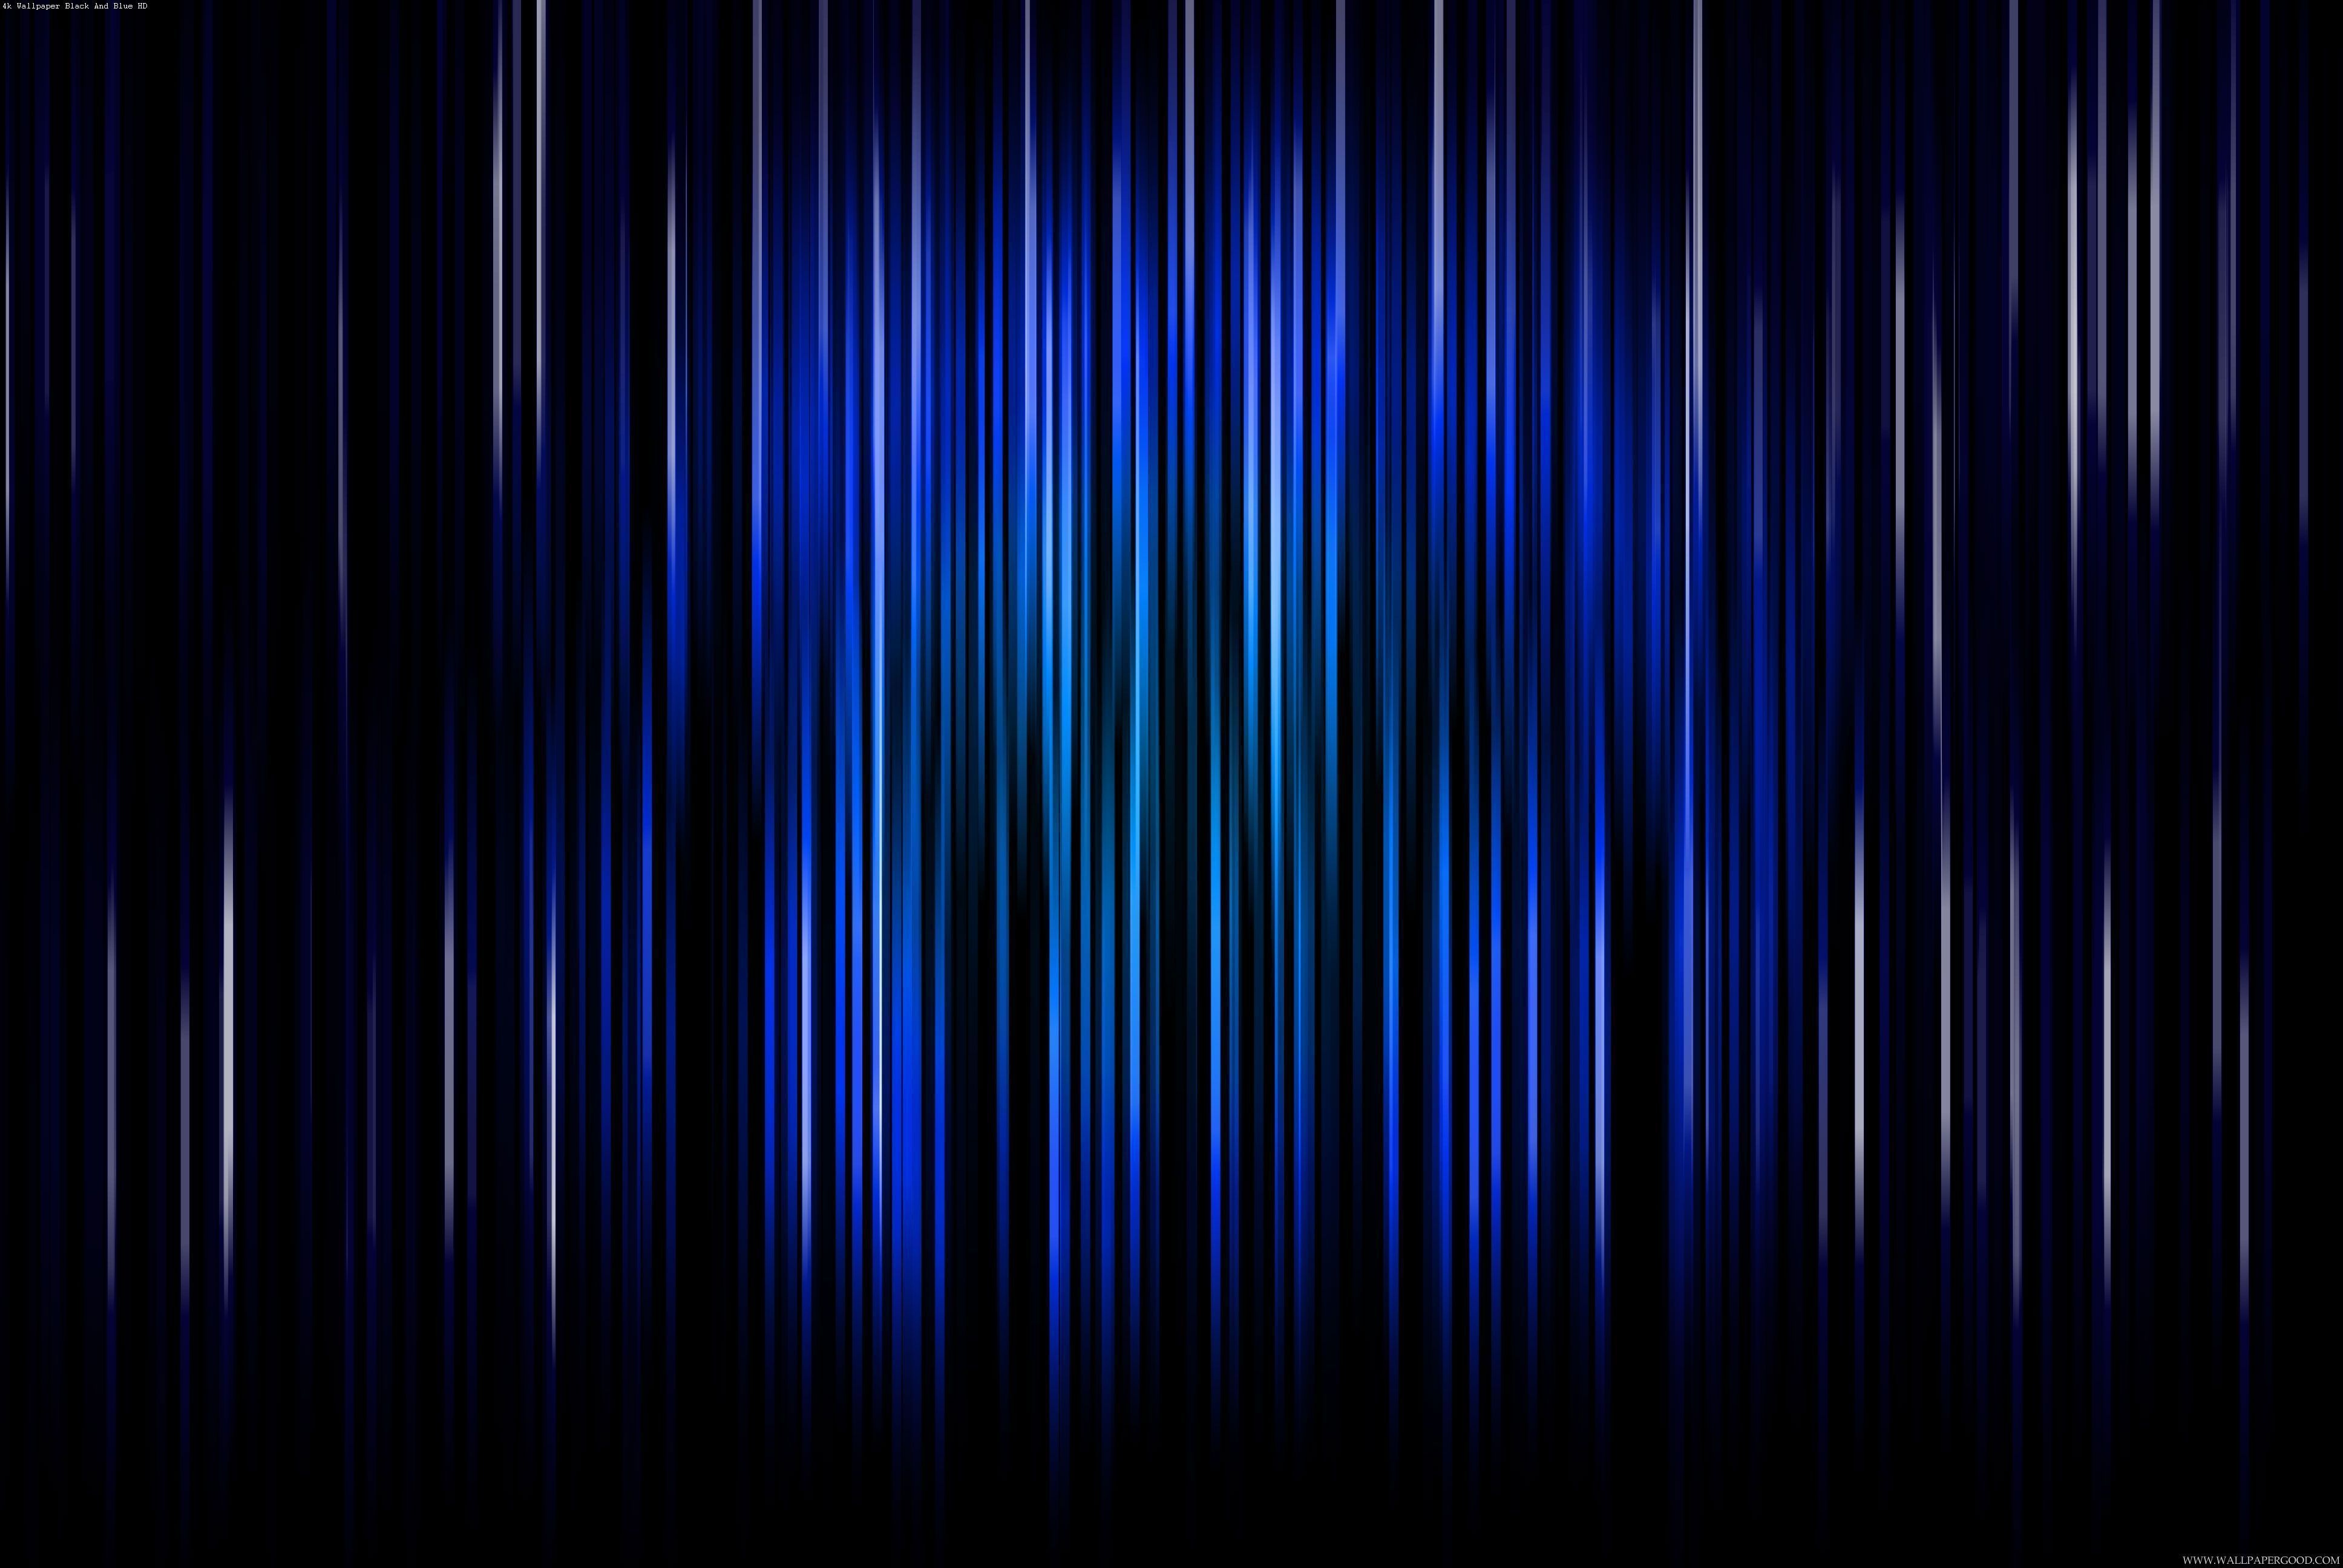 4k Wallpaper Black And Blue HD. Black and blue wallpaper, Thin blue line wallpaper, Abstract wallpaper